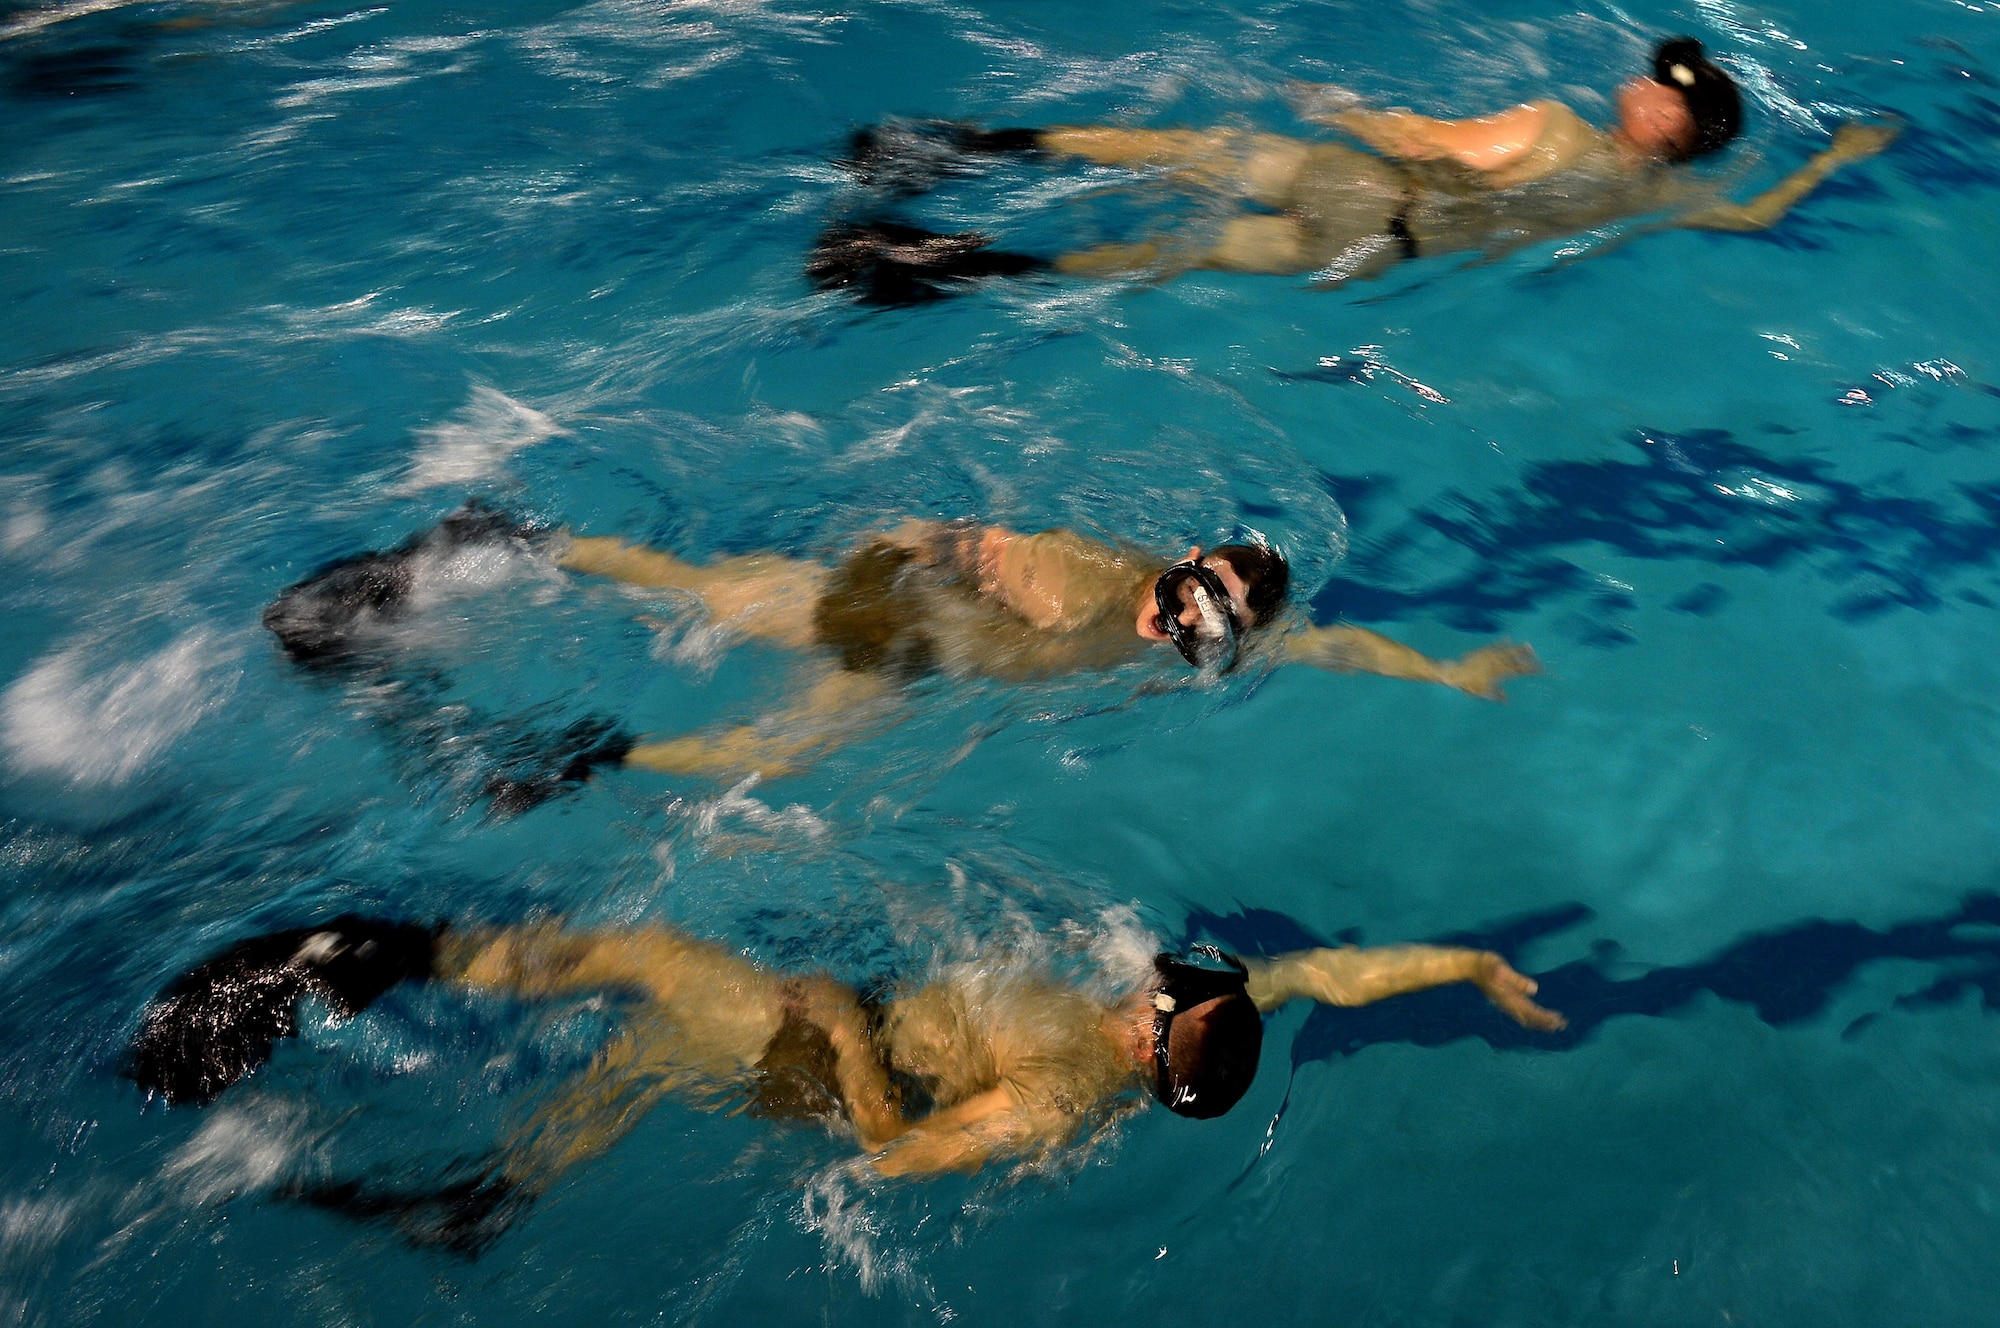 U.S. Air Force Combat Control trainees assigned to Operating Location C, 342nd Training Squadron, swim timed laps during an early morning water circuit training session at Pope Army Airfield, North Carolina, Feb 12, 2015. Airmen training to become CCT or Special Operations Weather Team members have to endure rigorous water exercises in order to become comfortable and efficient in the water. (U.S. Air Force photo by Staff Sgt. Kenny Holston)